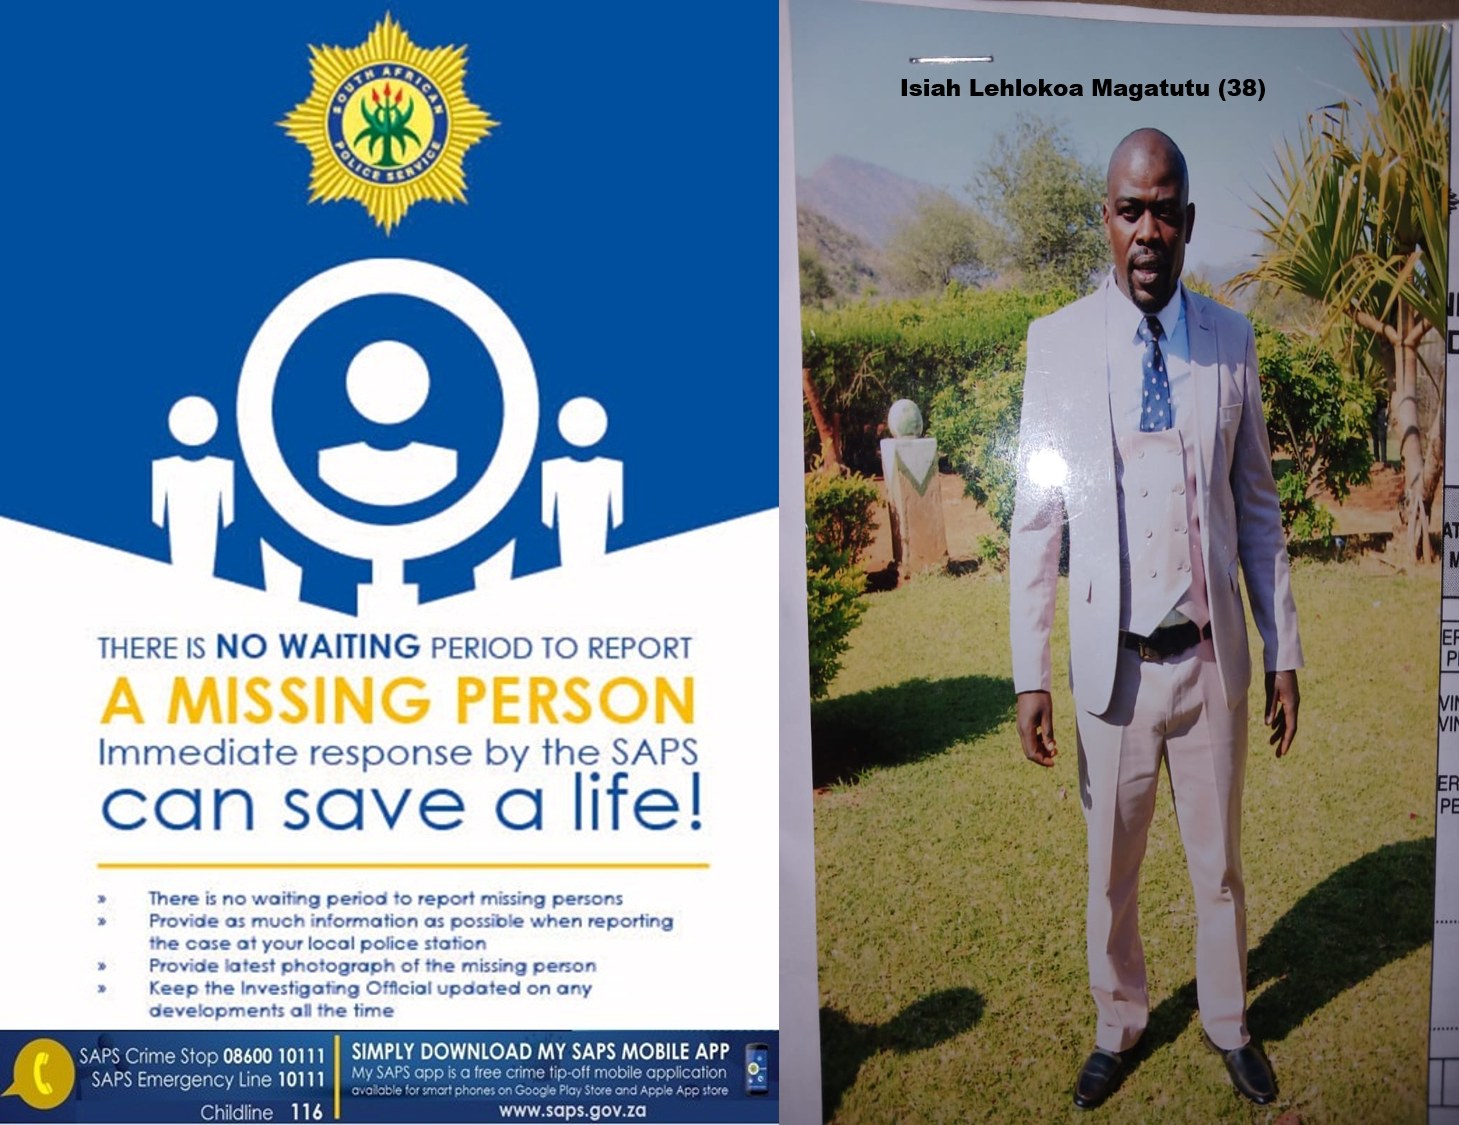 SAPS Mankweng activate a search operation for a missing 38-year-old man